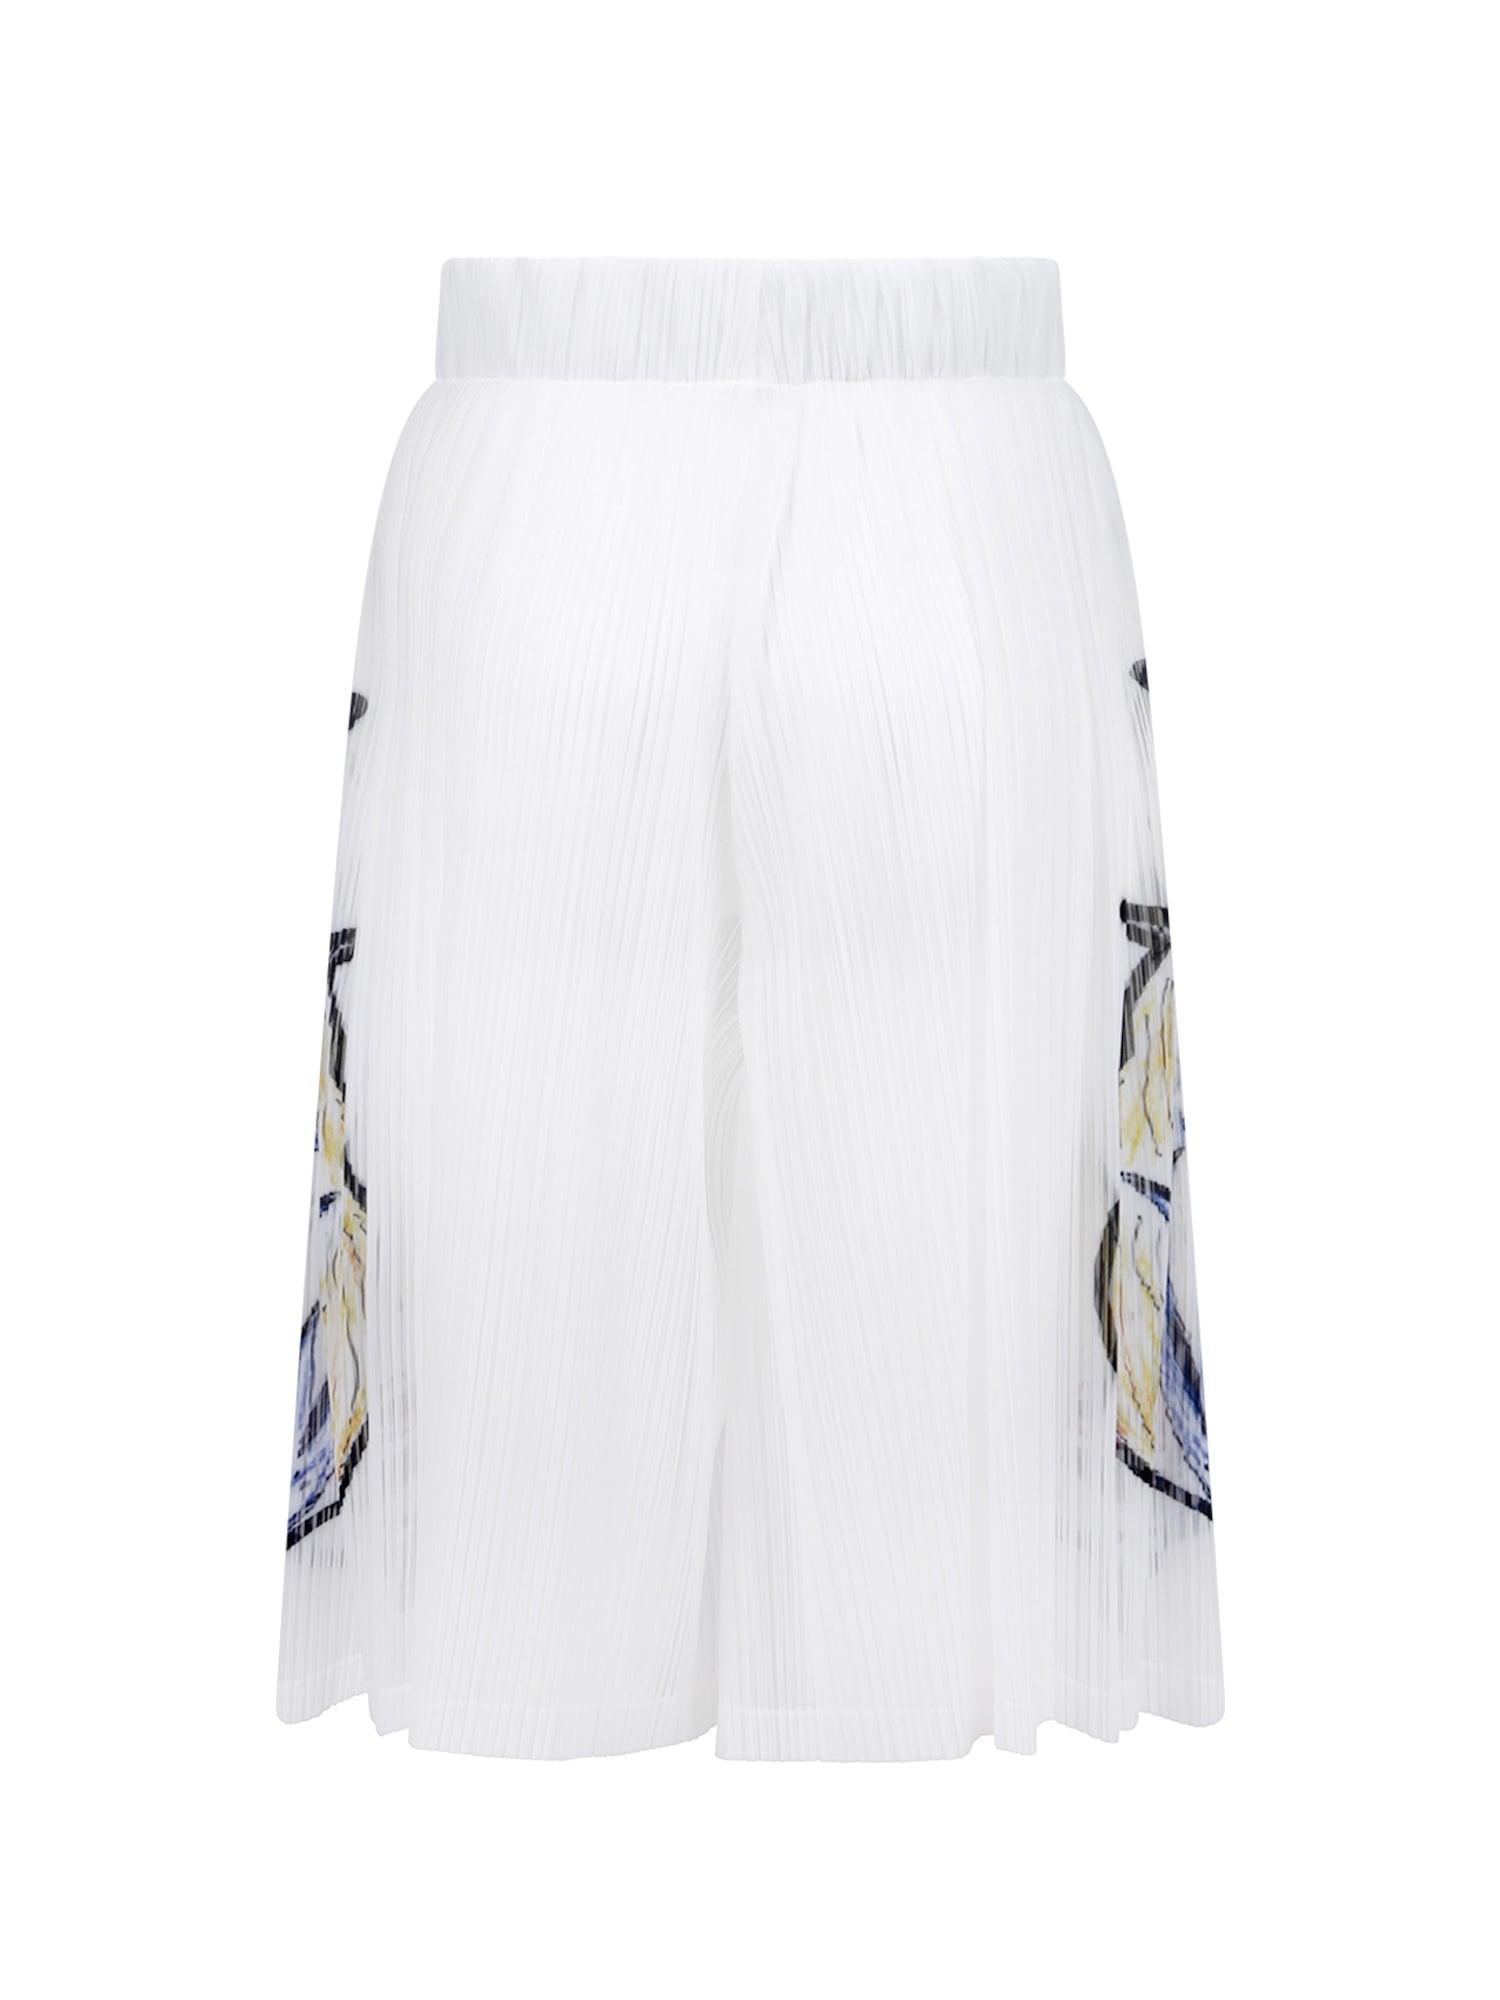 Burberry Bermuda Shorts in White for Men - Save 21% - Lyst